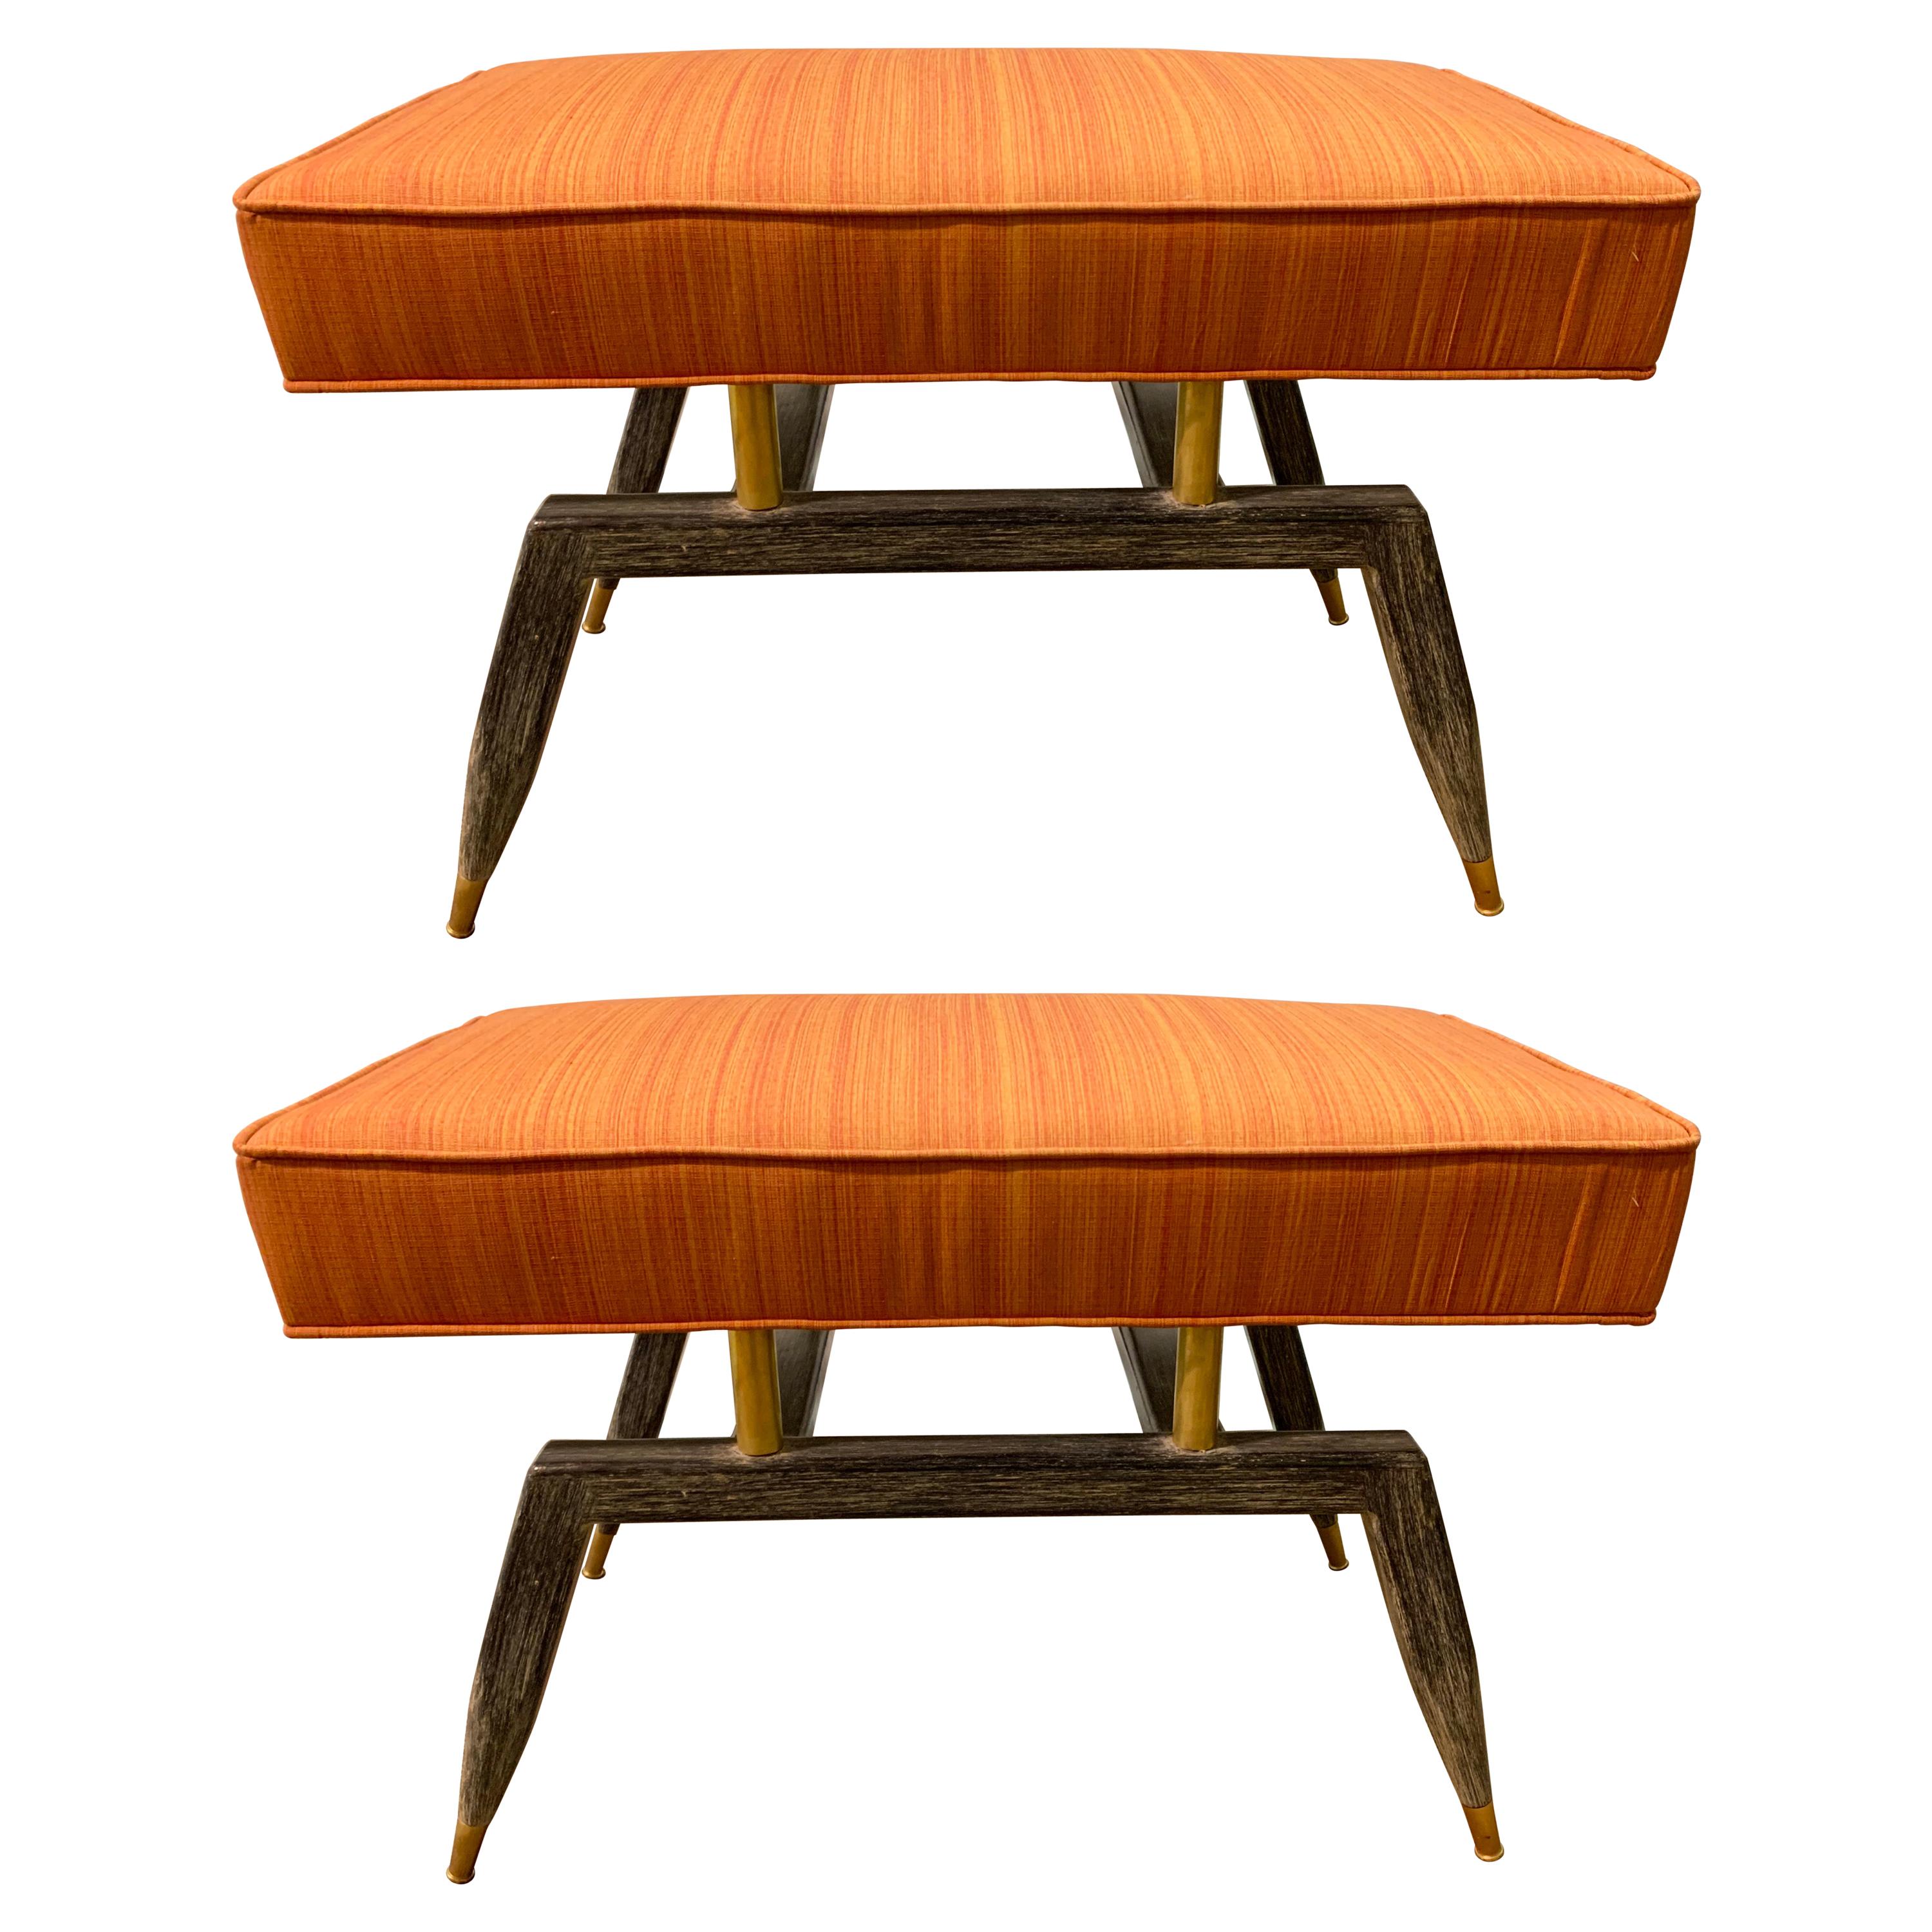 Pair of Mid-Century Modern Benches